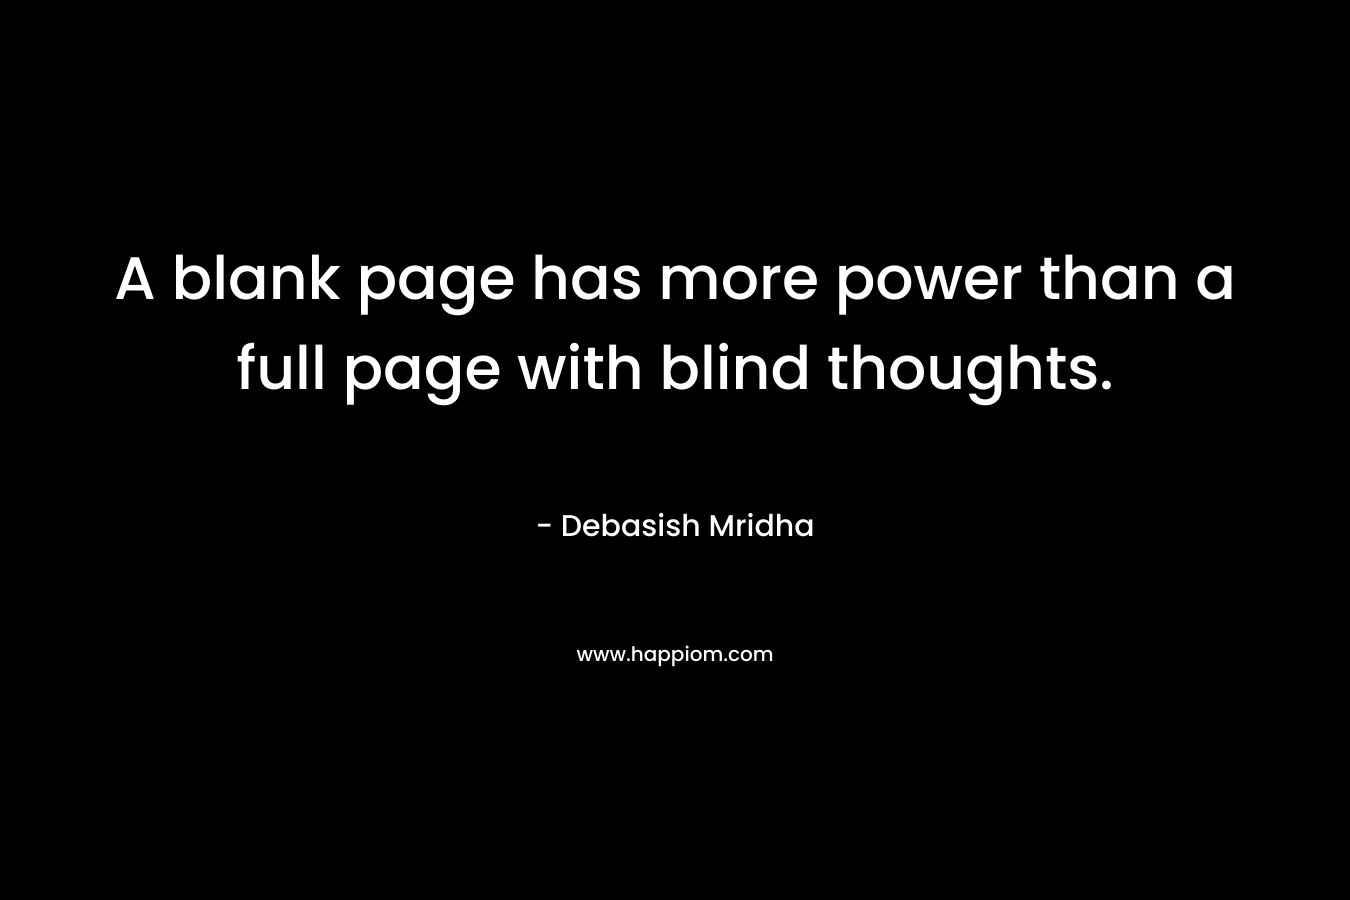 A blank page has more power than a full page with blind thoughts.